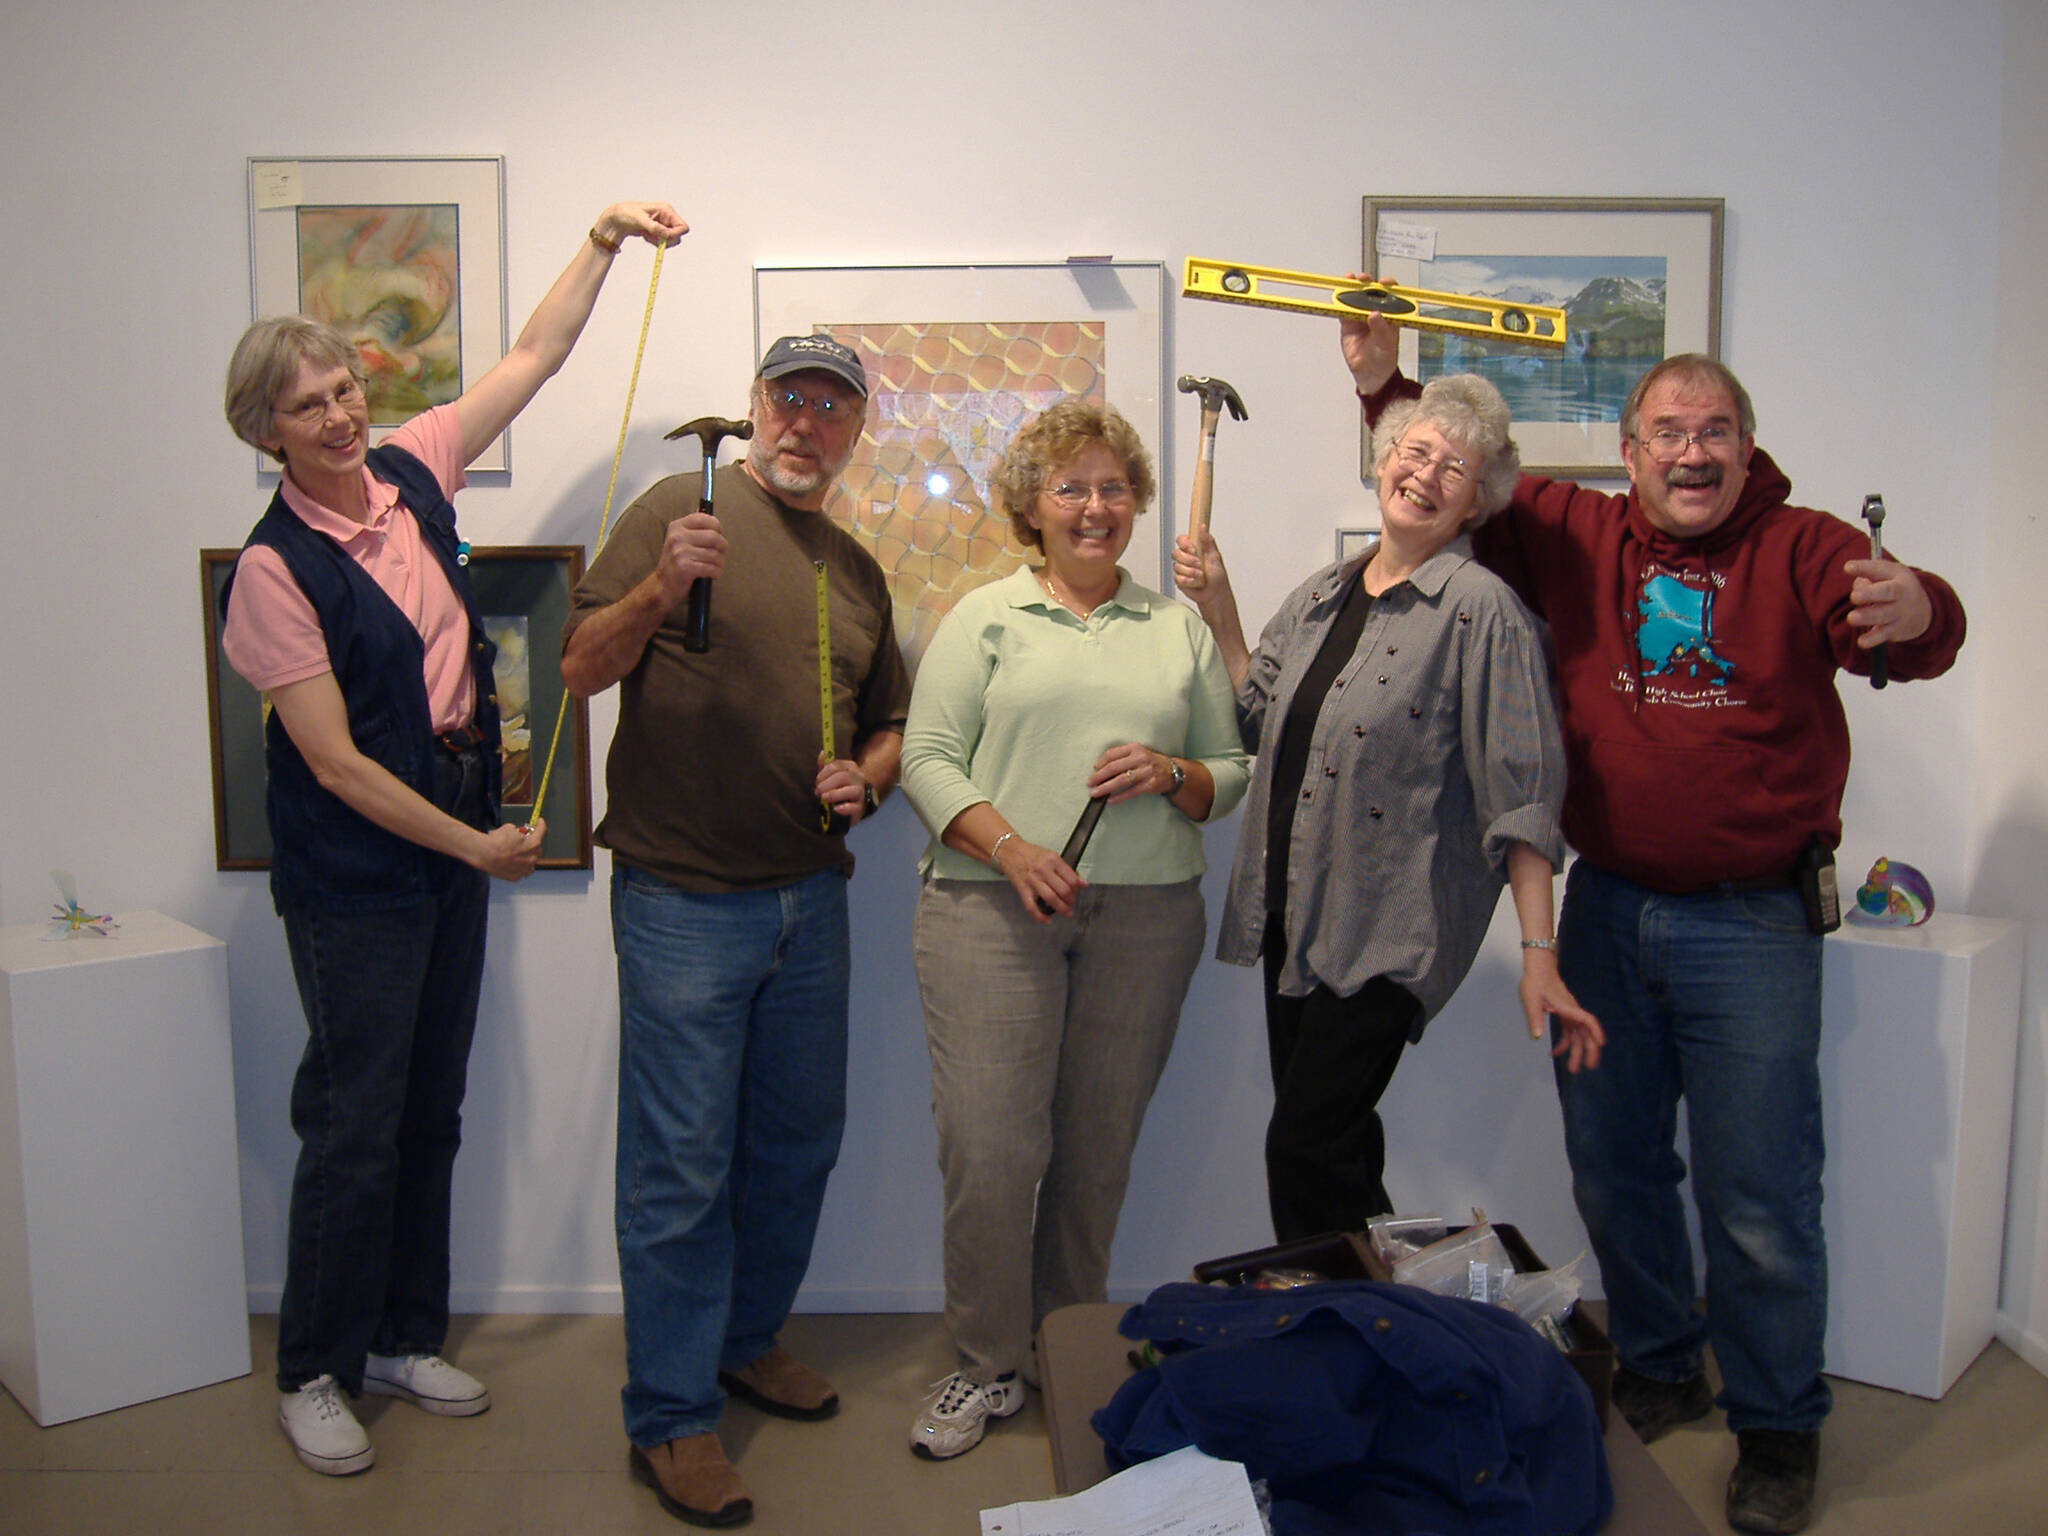 KBWS members hang a spring show at Fireweed Gallery in 2005. From left to right, Donna Martin, Tony Clawson, Pat Wells, founder Paula Dickey, and Michael Murray. Photo provided by Donna Martin